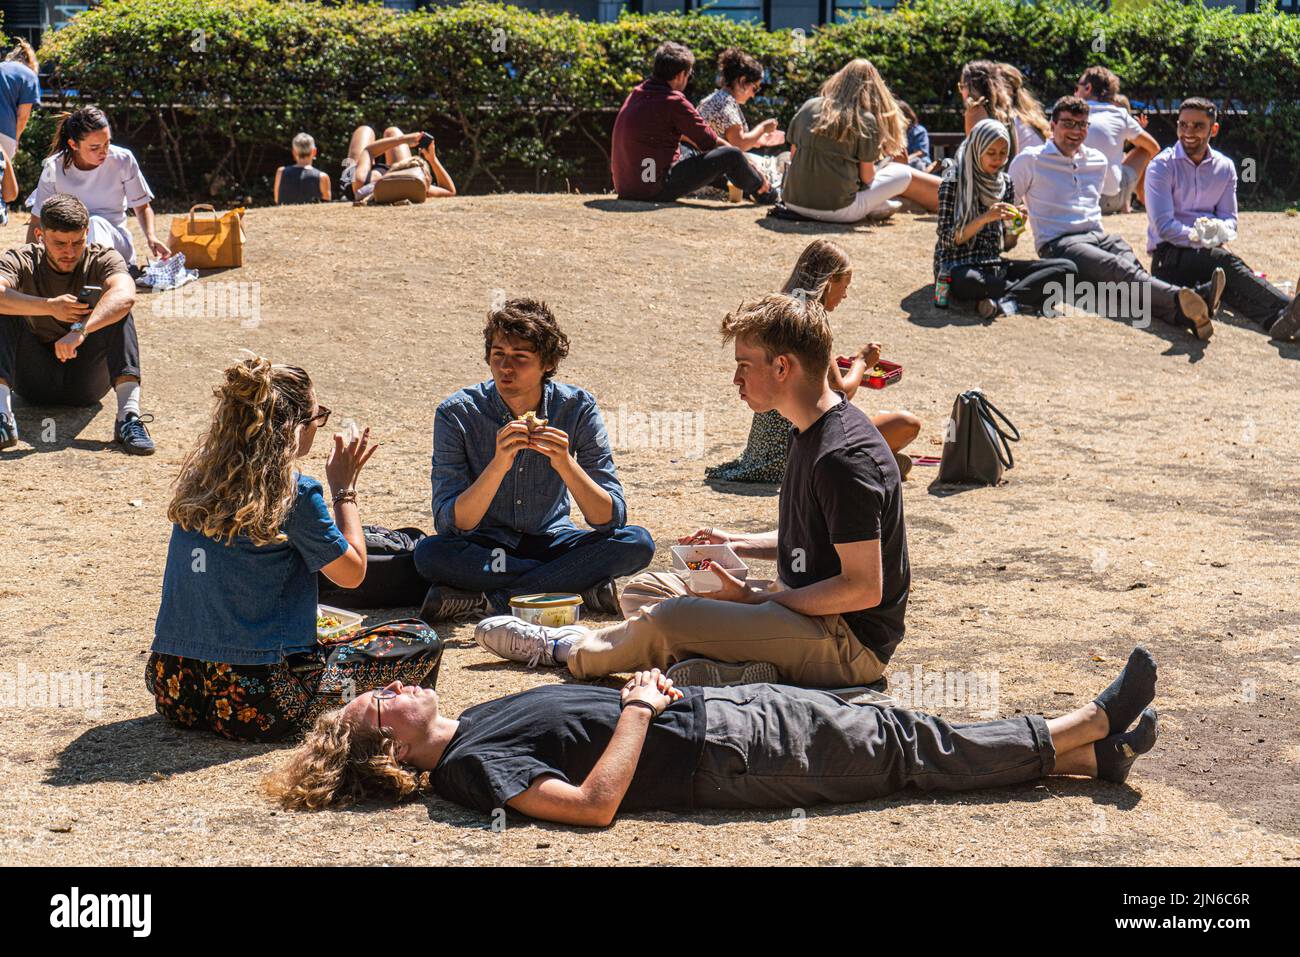 London, UK. 9 August 2022  Office workers enjoying the sunshine on the parched grass in Cavendish square London. The Uk health security agency has issued a warning as England is placed on a level 3 health alert  temperatures are expected to soar to mid 30's celsius for the next week   Credit. amer ghazzal/Alamy Live News Stock Photo